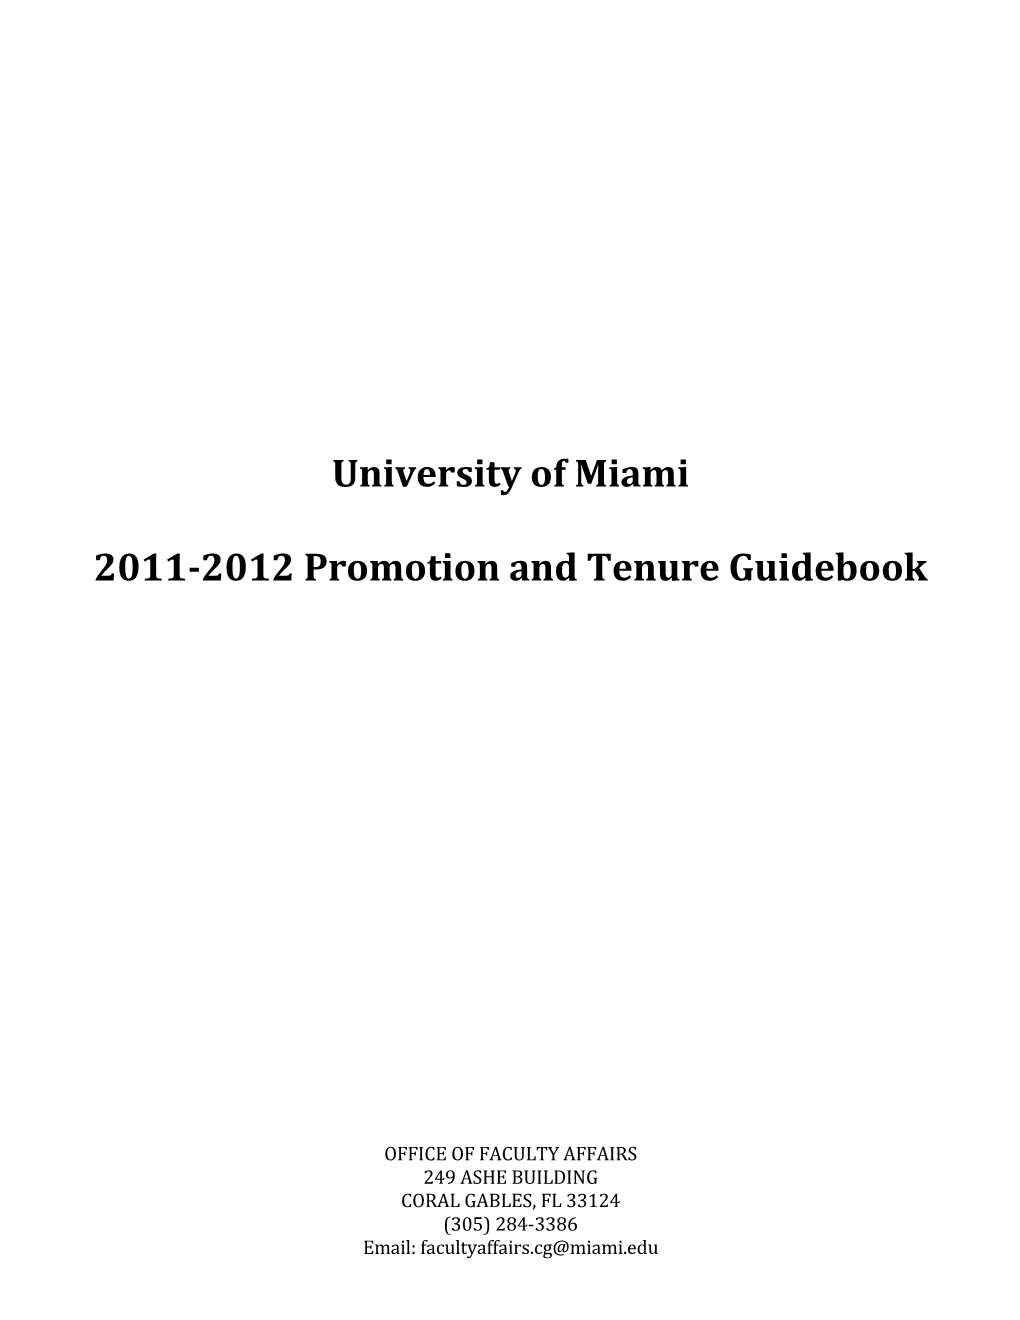 2011-2012 Promotion and Tenure Guidebook